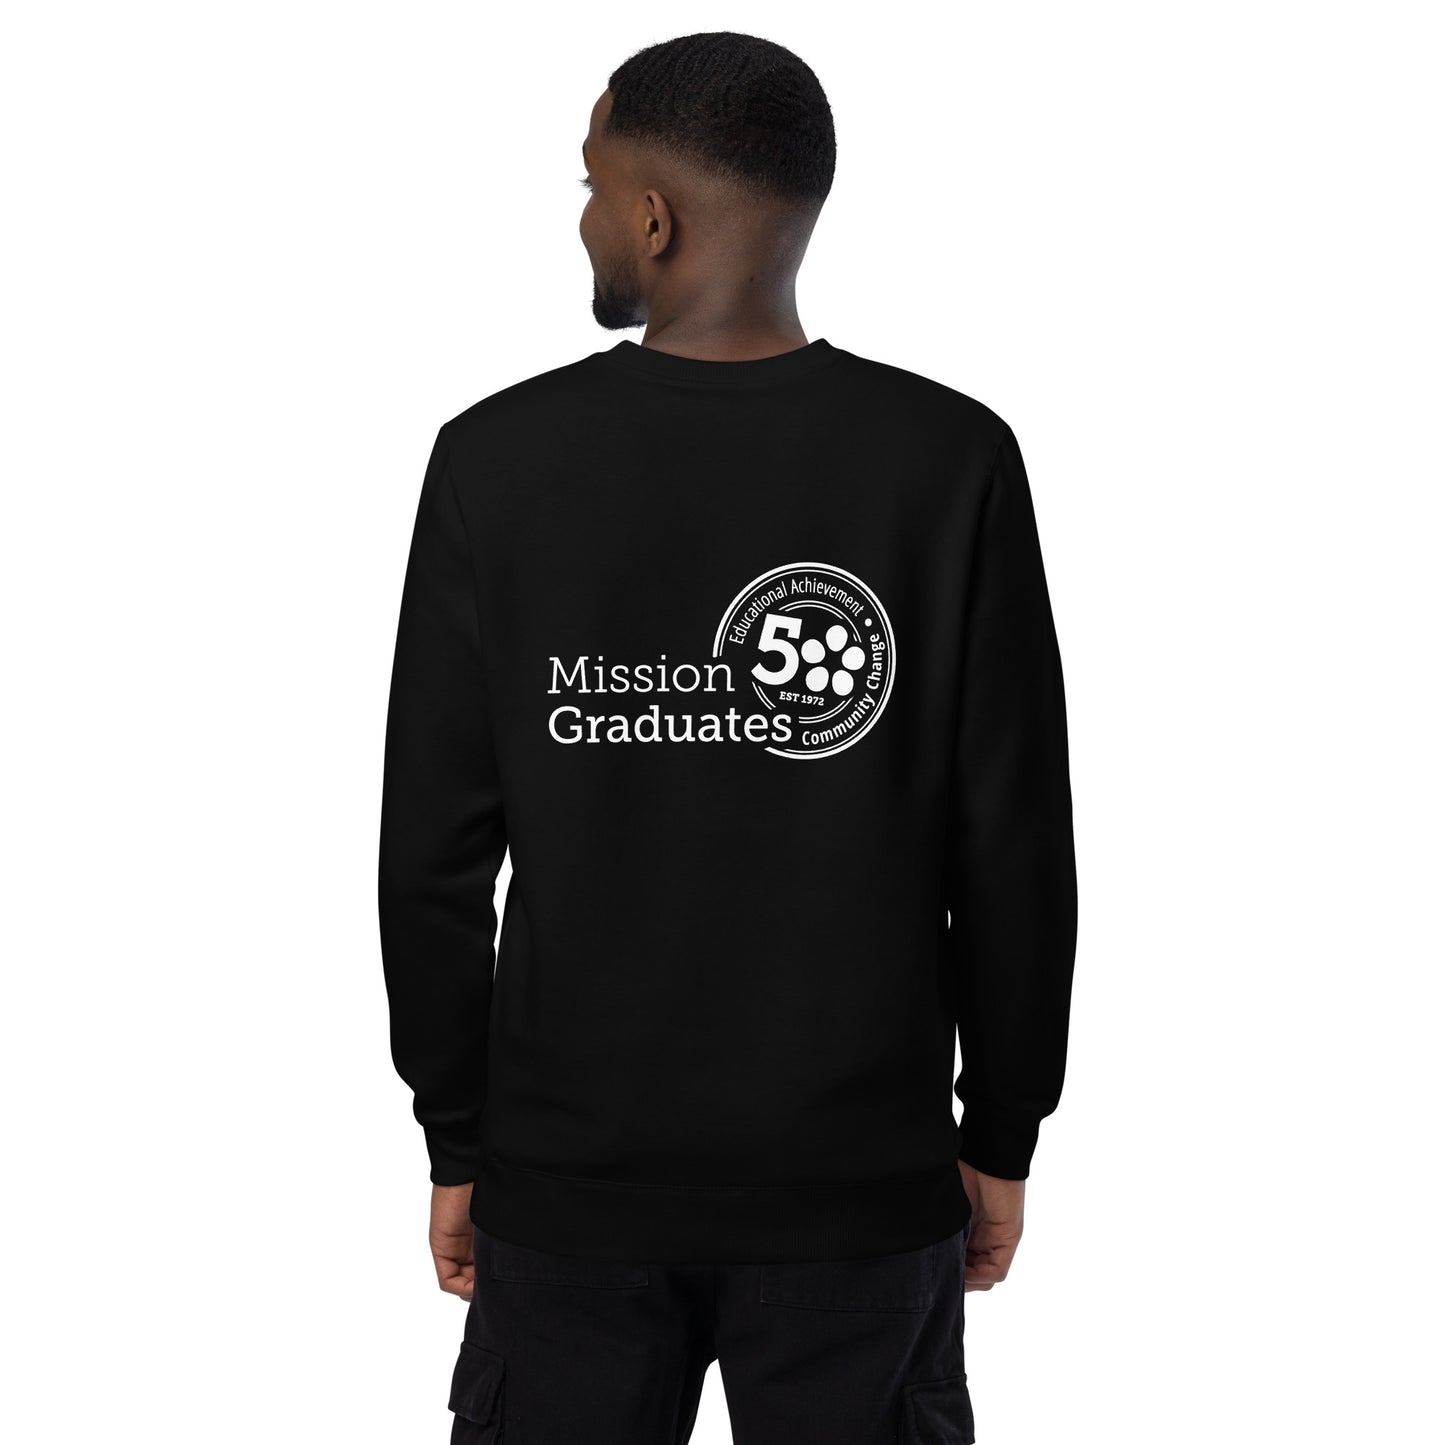 Mission Graduates Unisex Fashion Sweatshirt, Favicon Logo Front Chest with Full Logo Print on Reverse - Available in Three Colors!